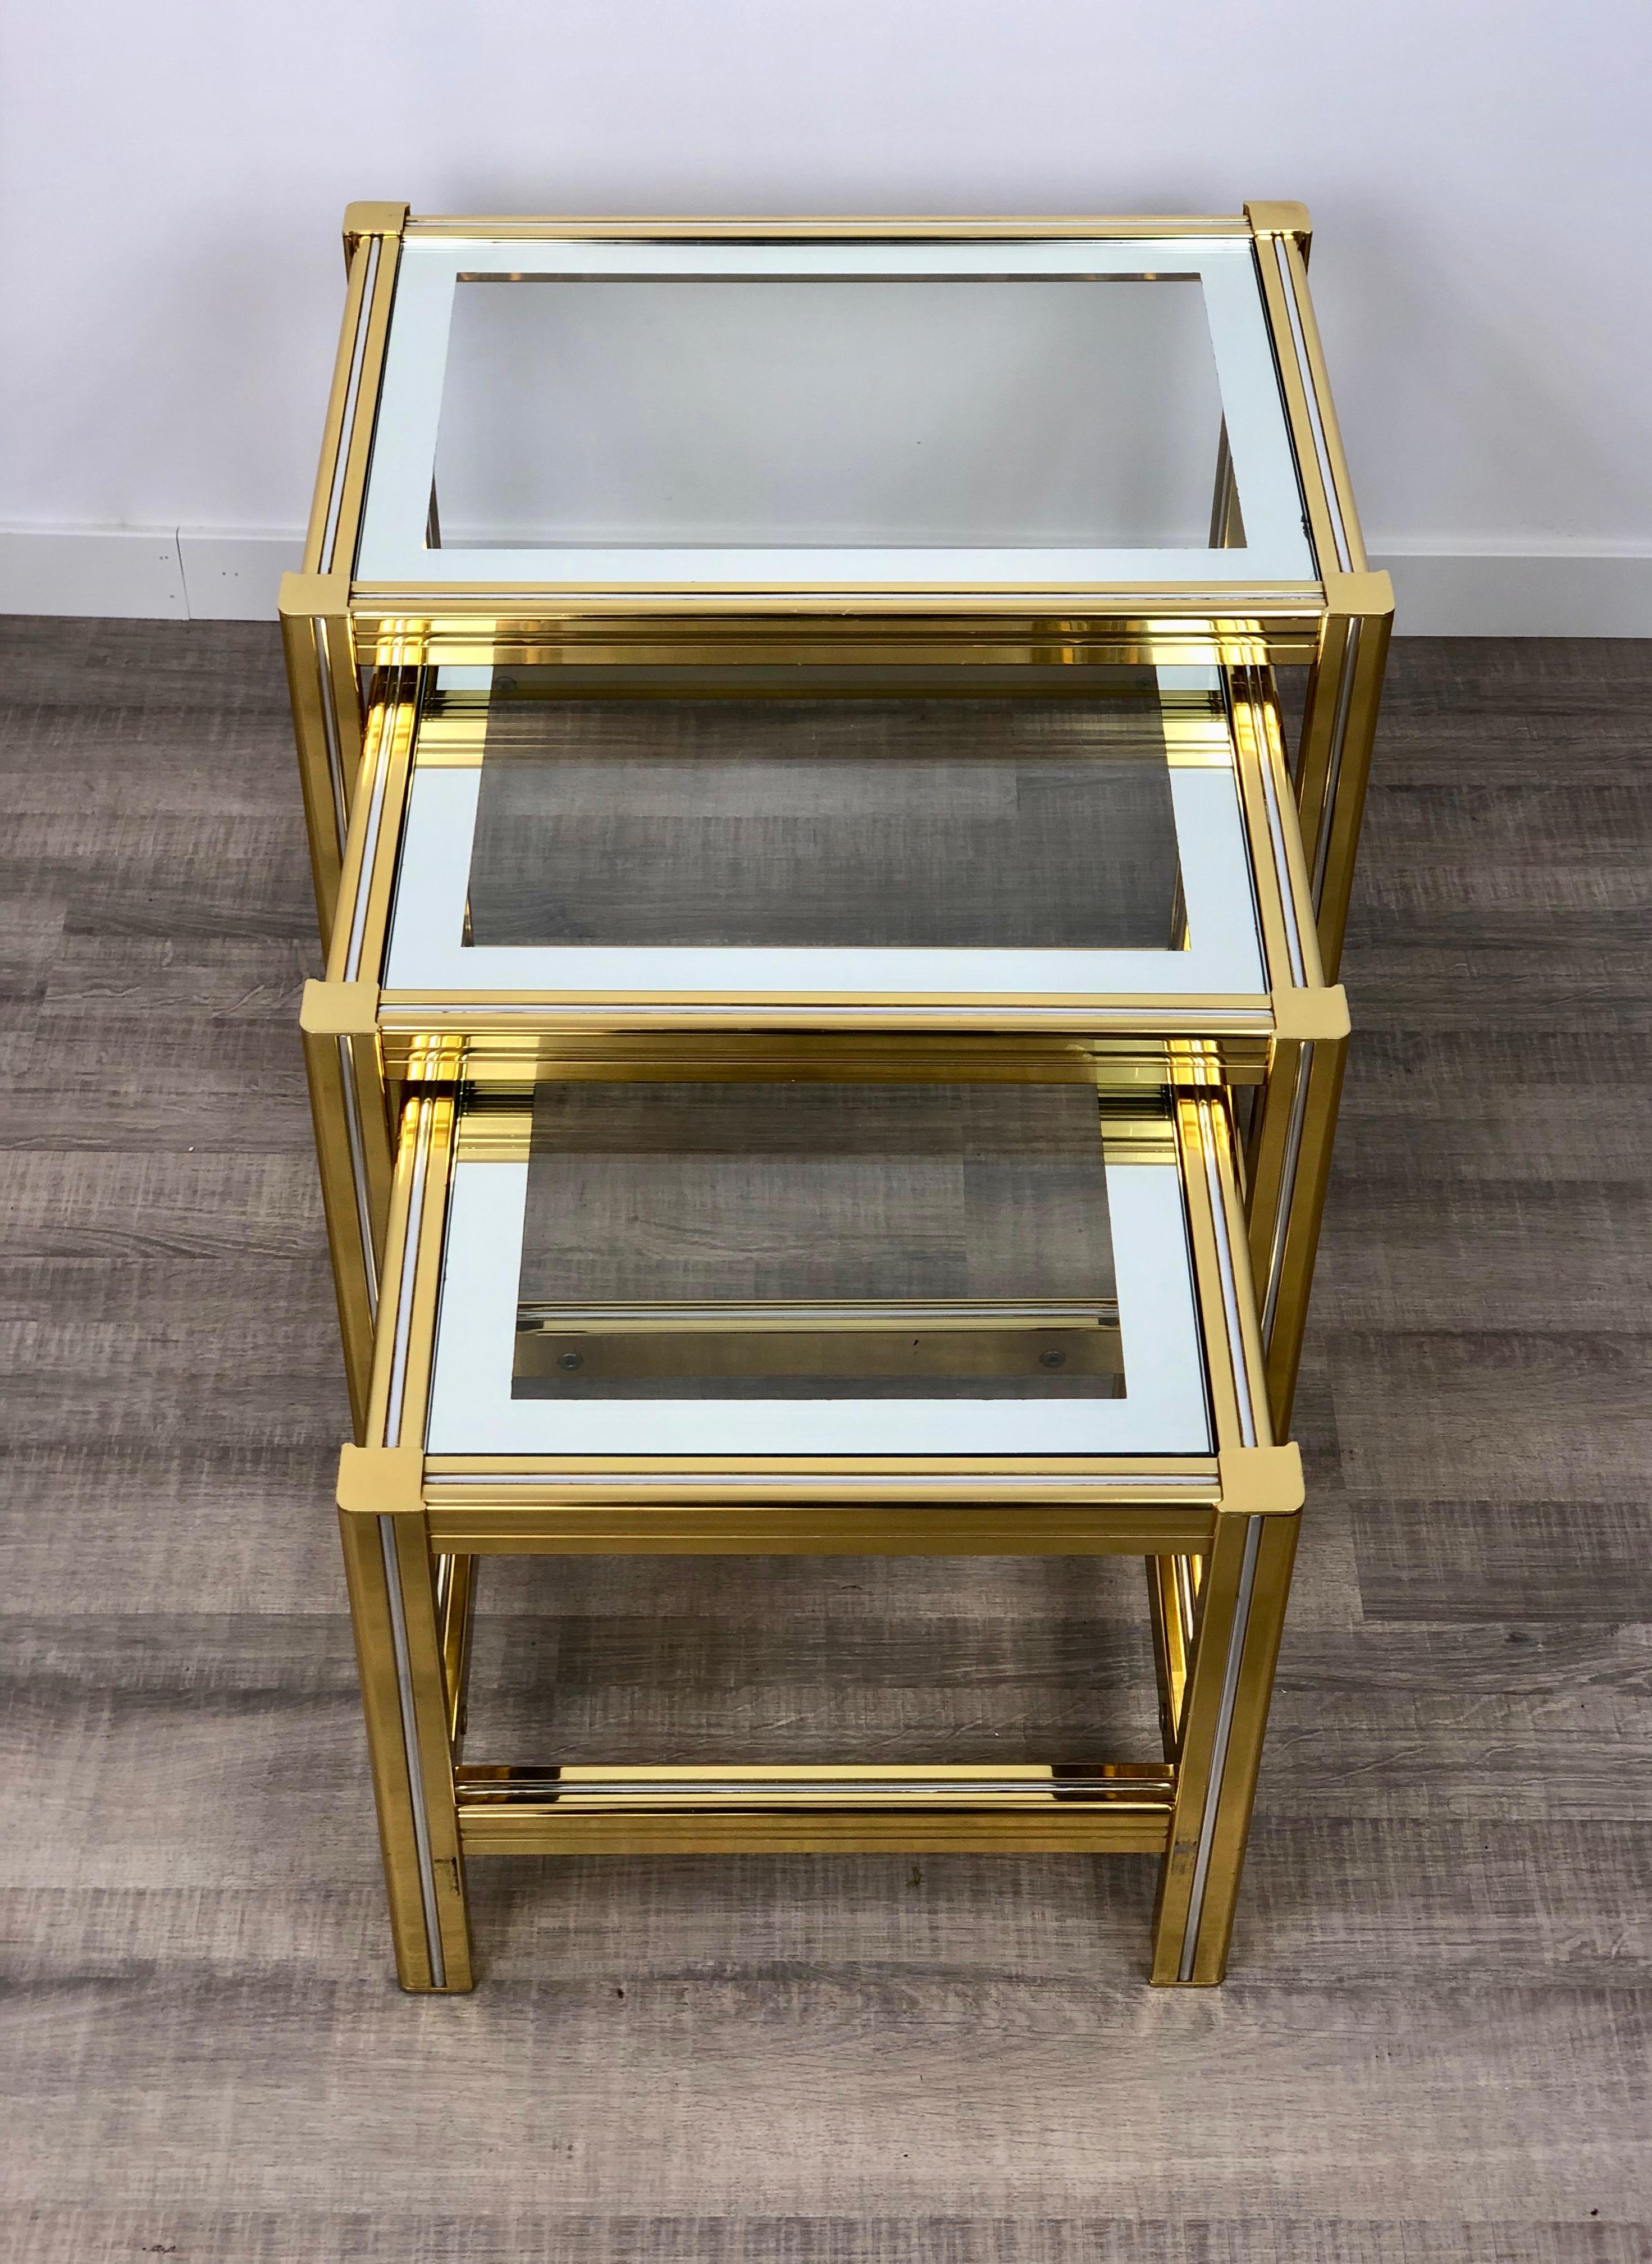 Tris of Increasing Dimensions Side Coffe Table in Brass, Glass and Chrome, 1970s For Sale 2